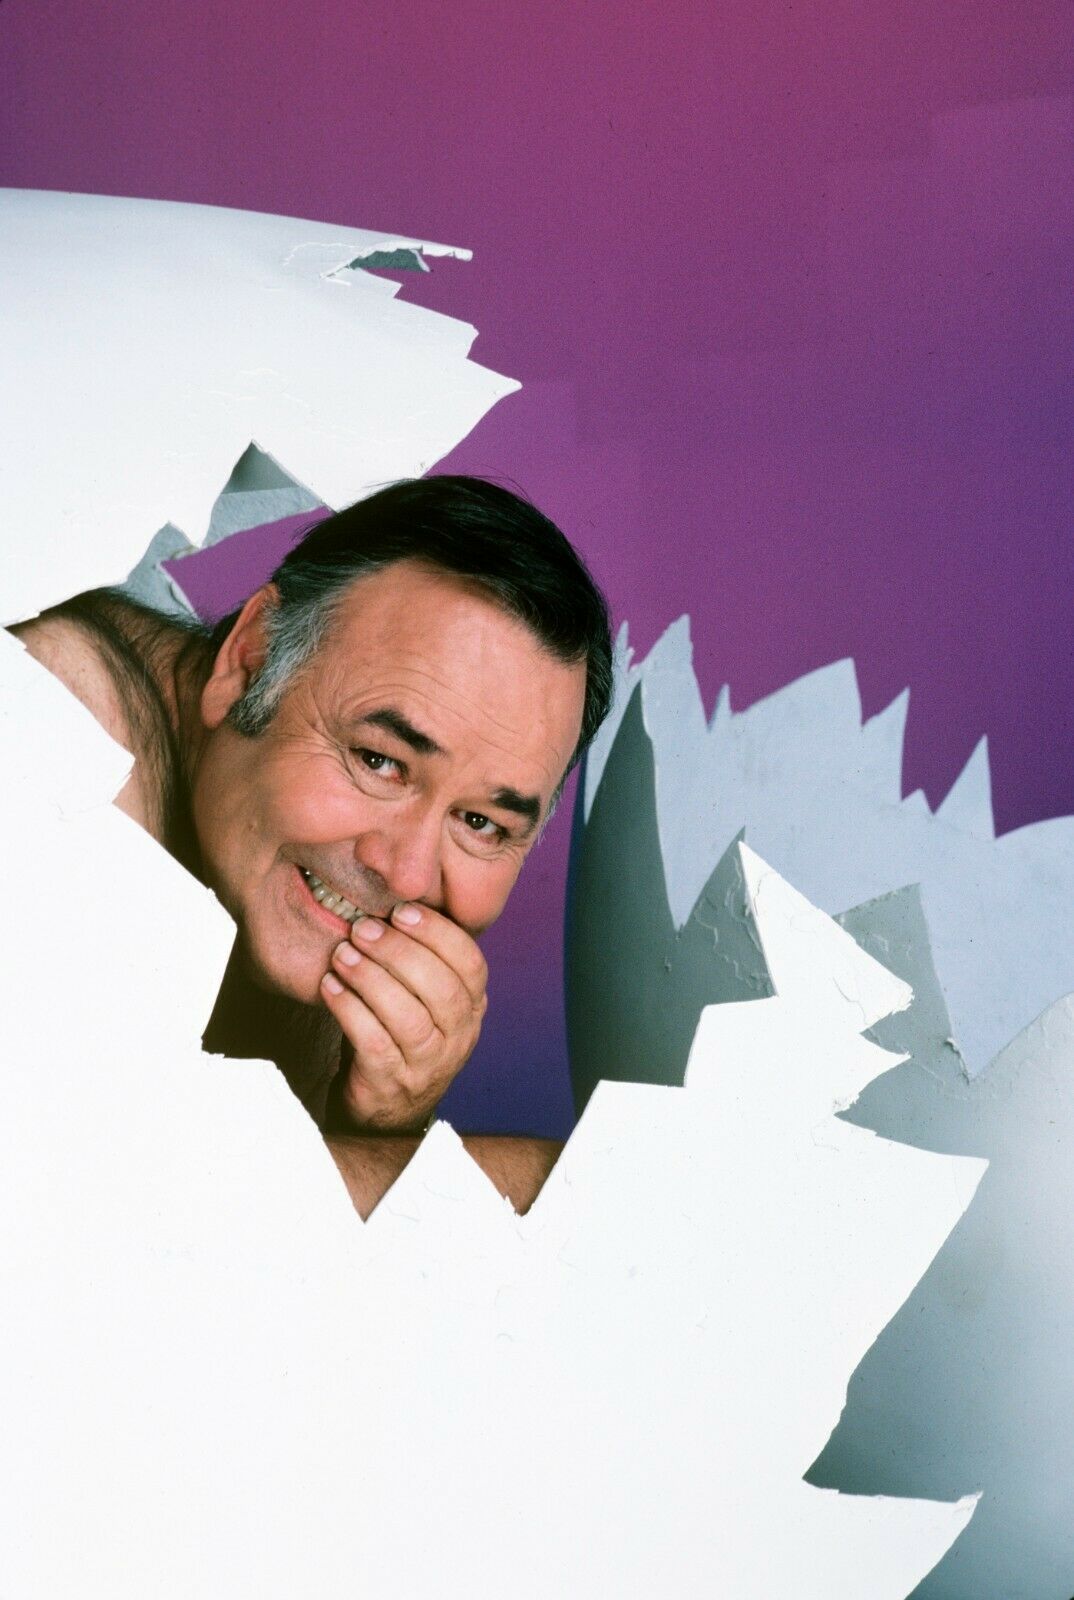 MORK AND MINDY - TV SHOW PHOTO #21 - Jonathan Winters